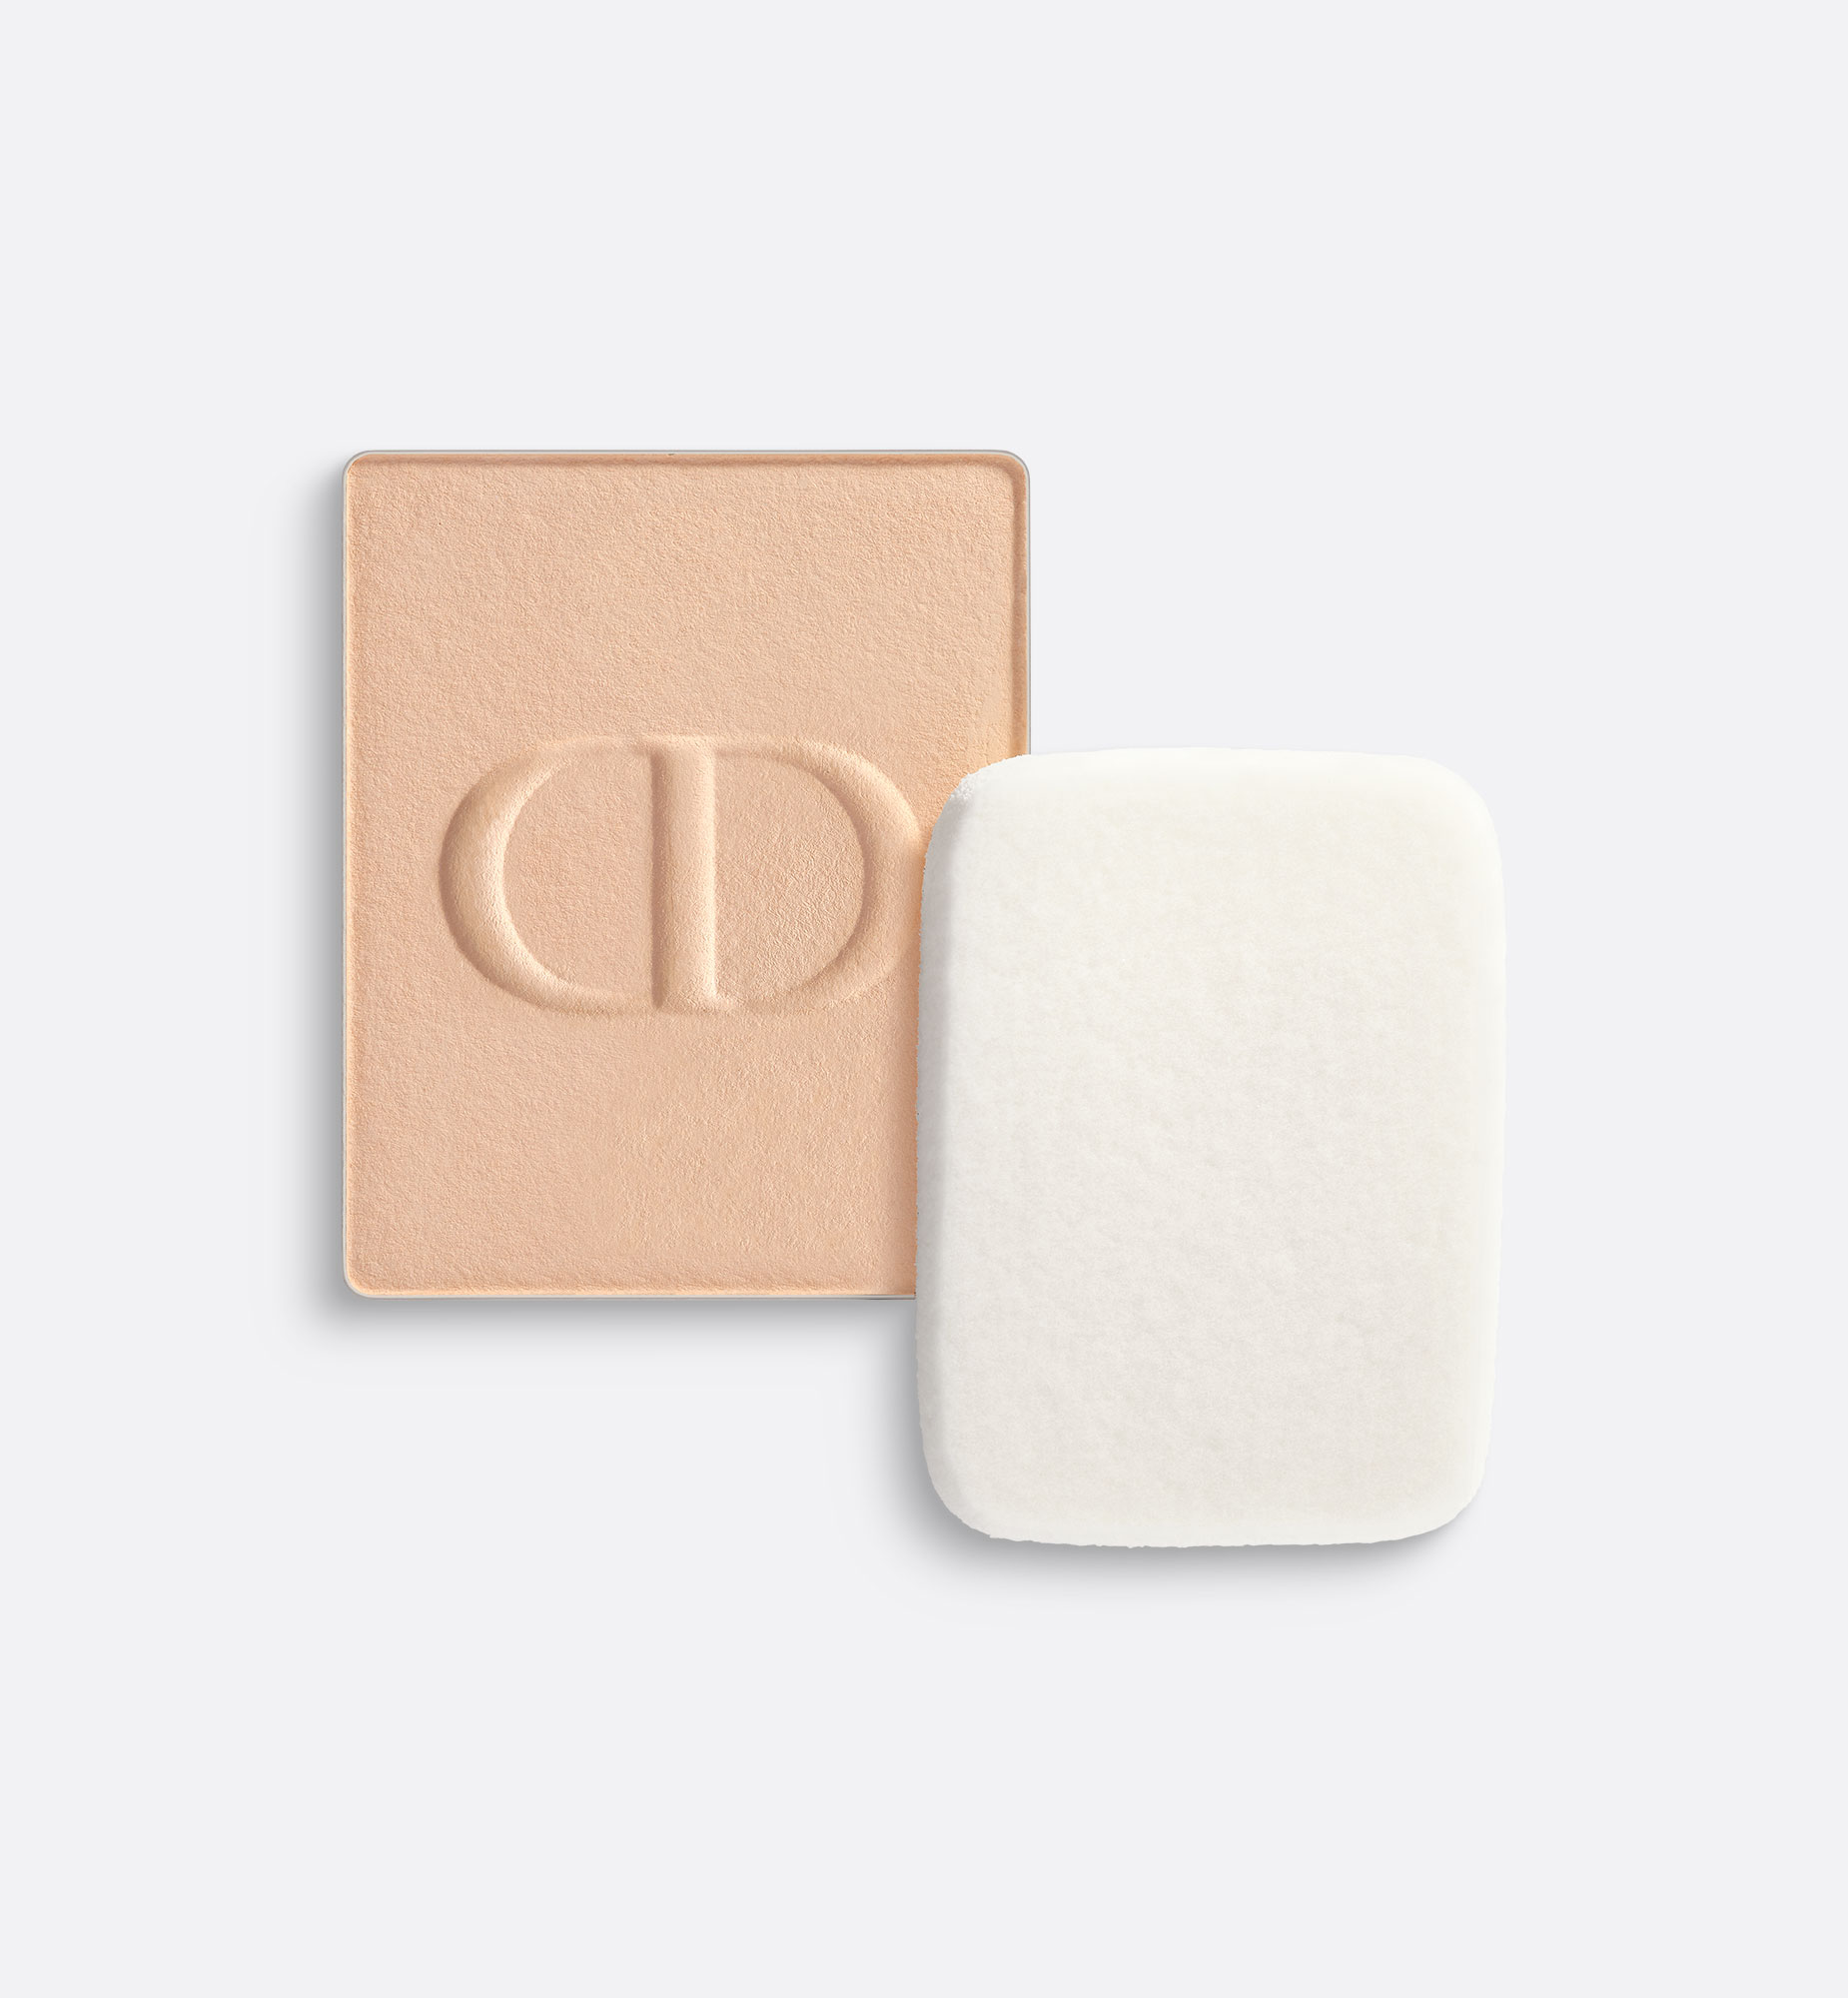 Dior Transfer-proof Compact Foundation Refill